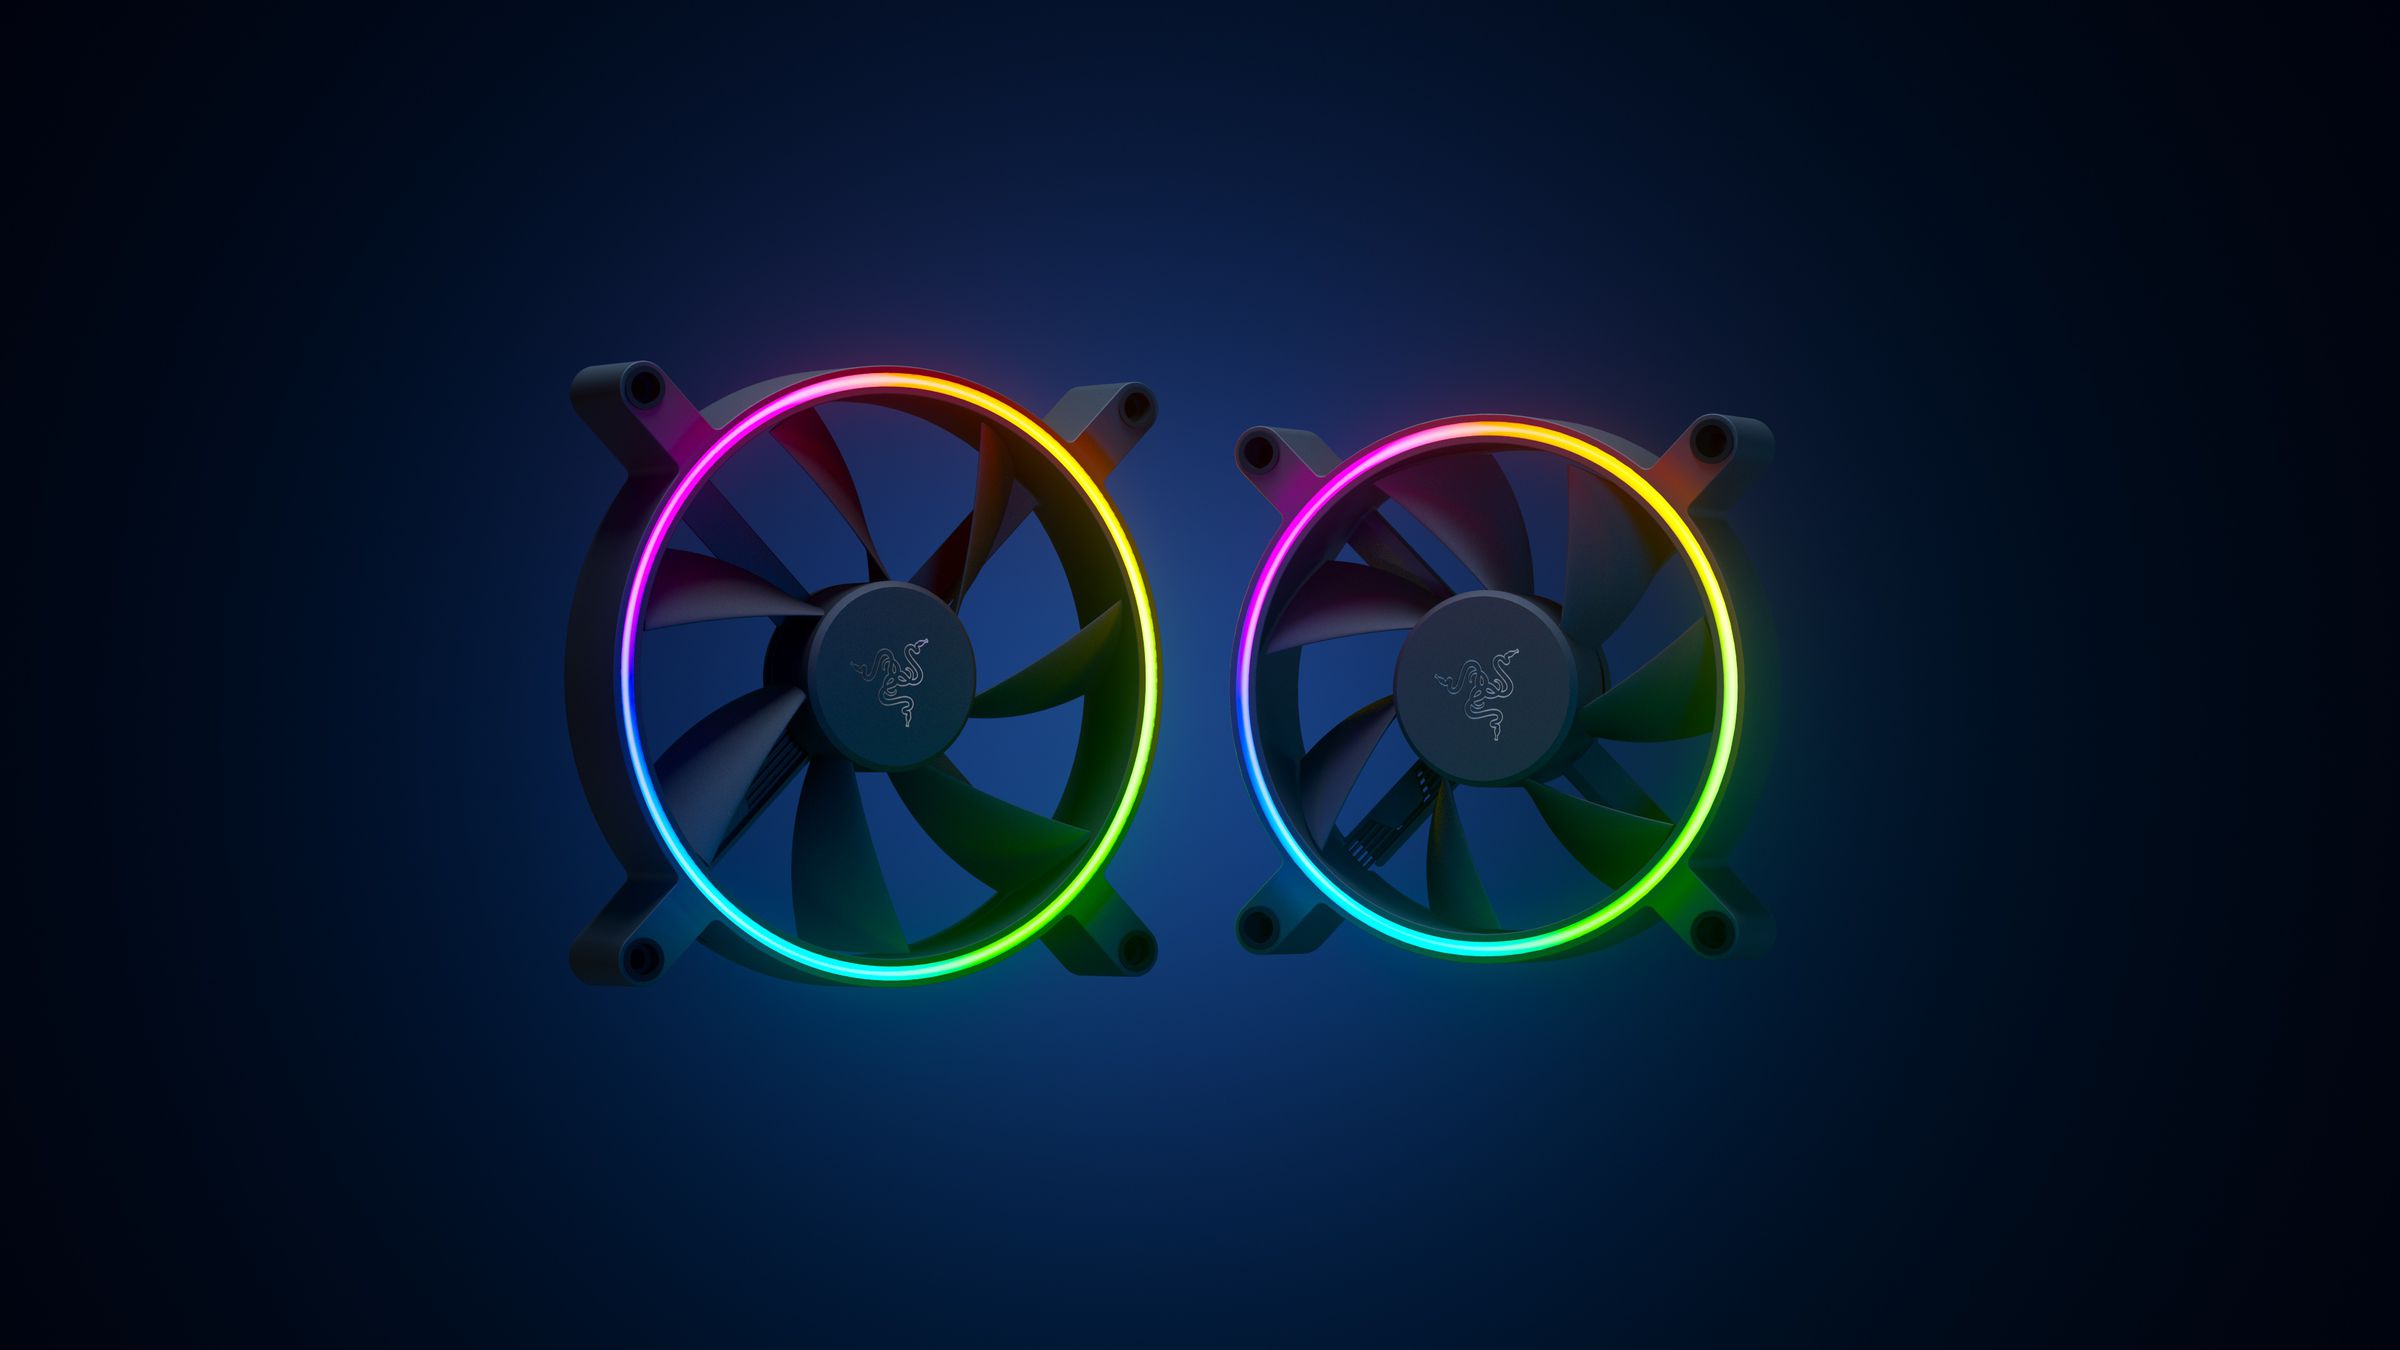 Razer’s Kunai fans include an RGB ring of LEDs.